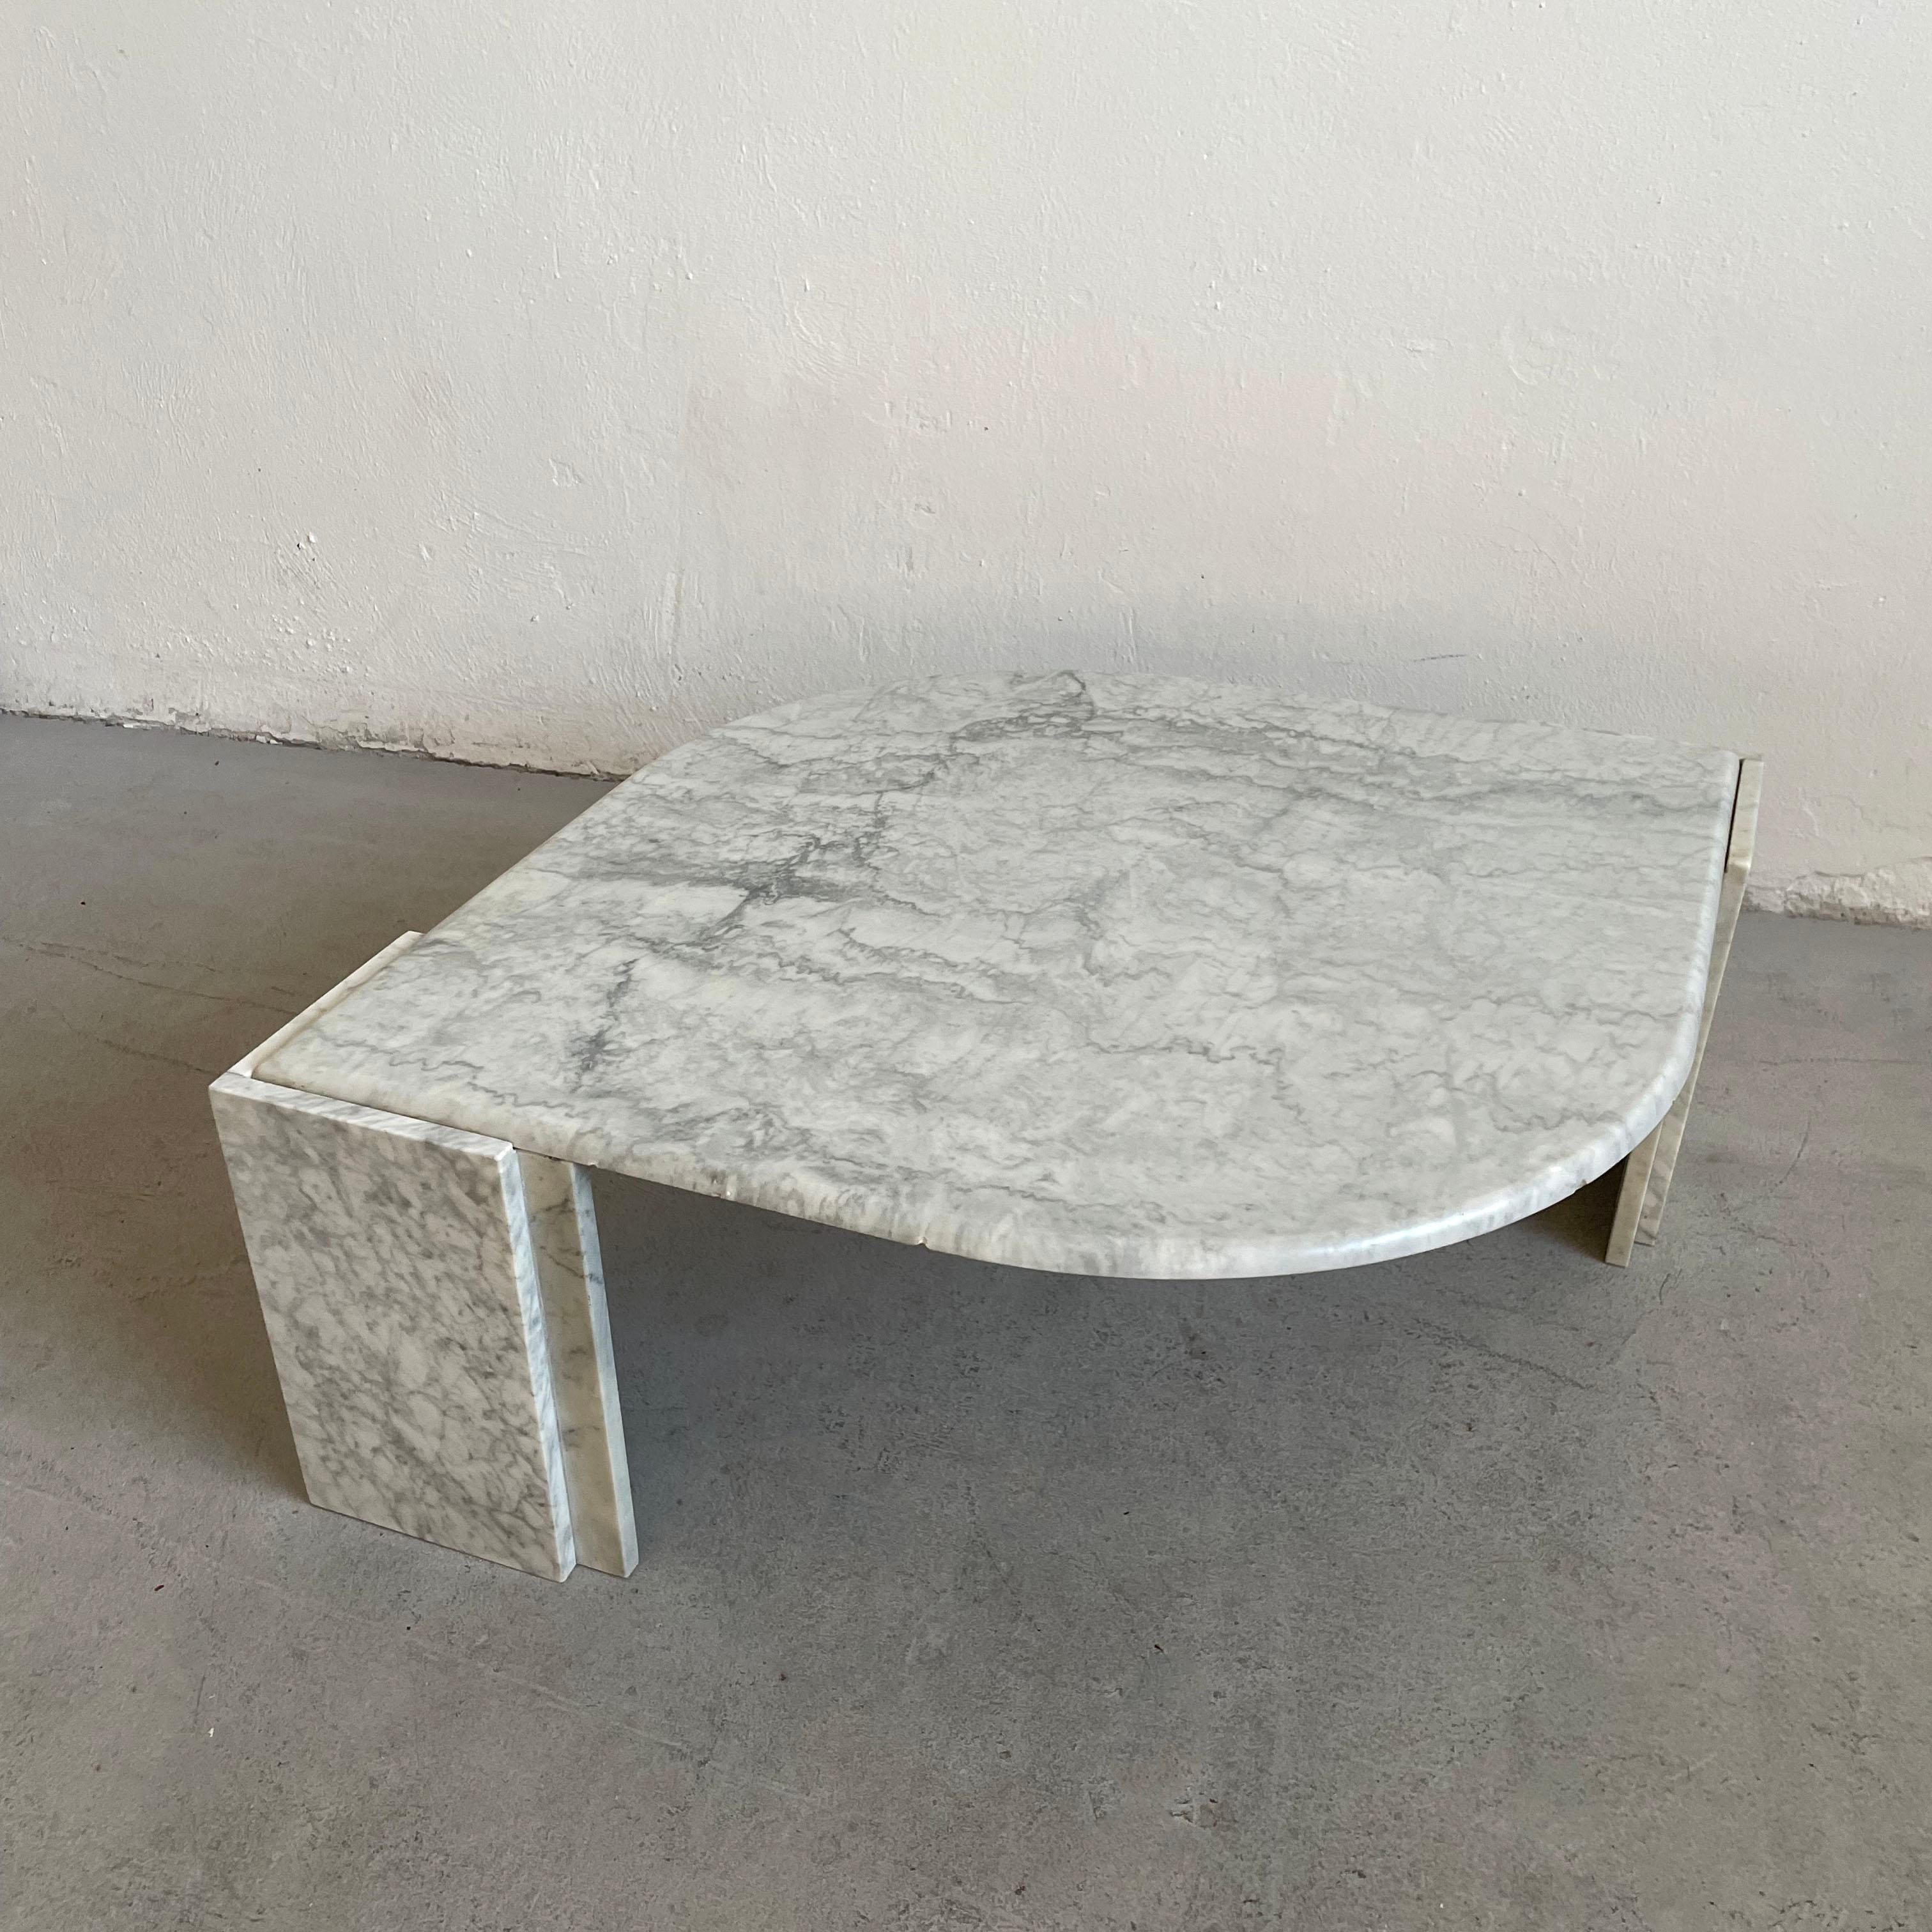 Beautiful  Cat's eye mid-century coffee table made of white marble with grey veins 
The elegant, sophisticated design is very similar to the coffee tables made by Roche Bobois, but the attribution is not fully confirmed.
The piece is in very good